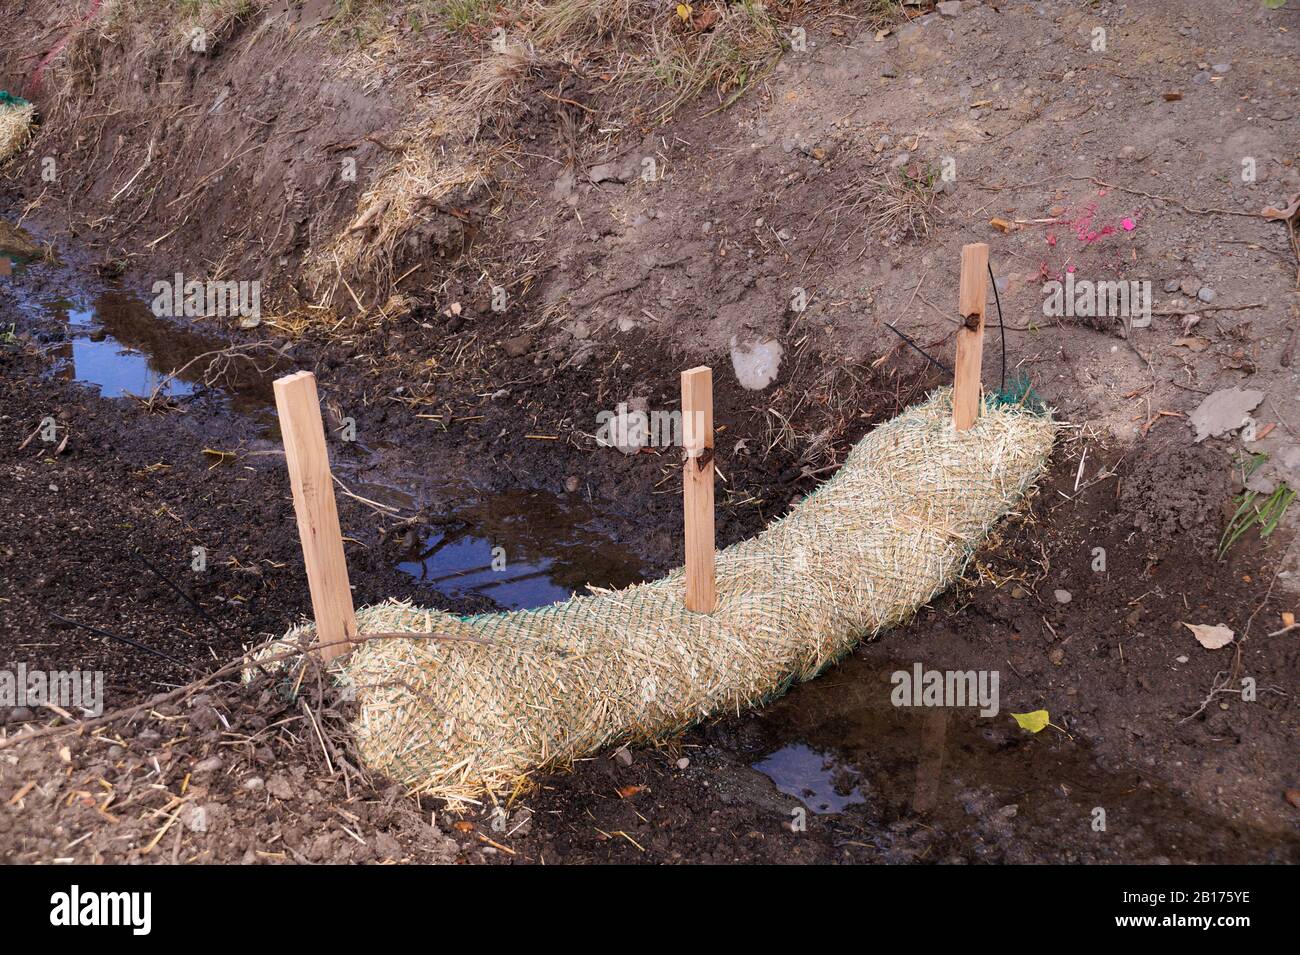 Land drainage works. The use of straw wattles (straw worms, bio-logs, straw noodles). Stock Photo